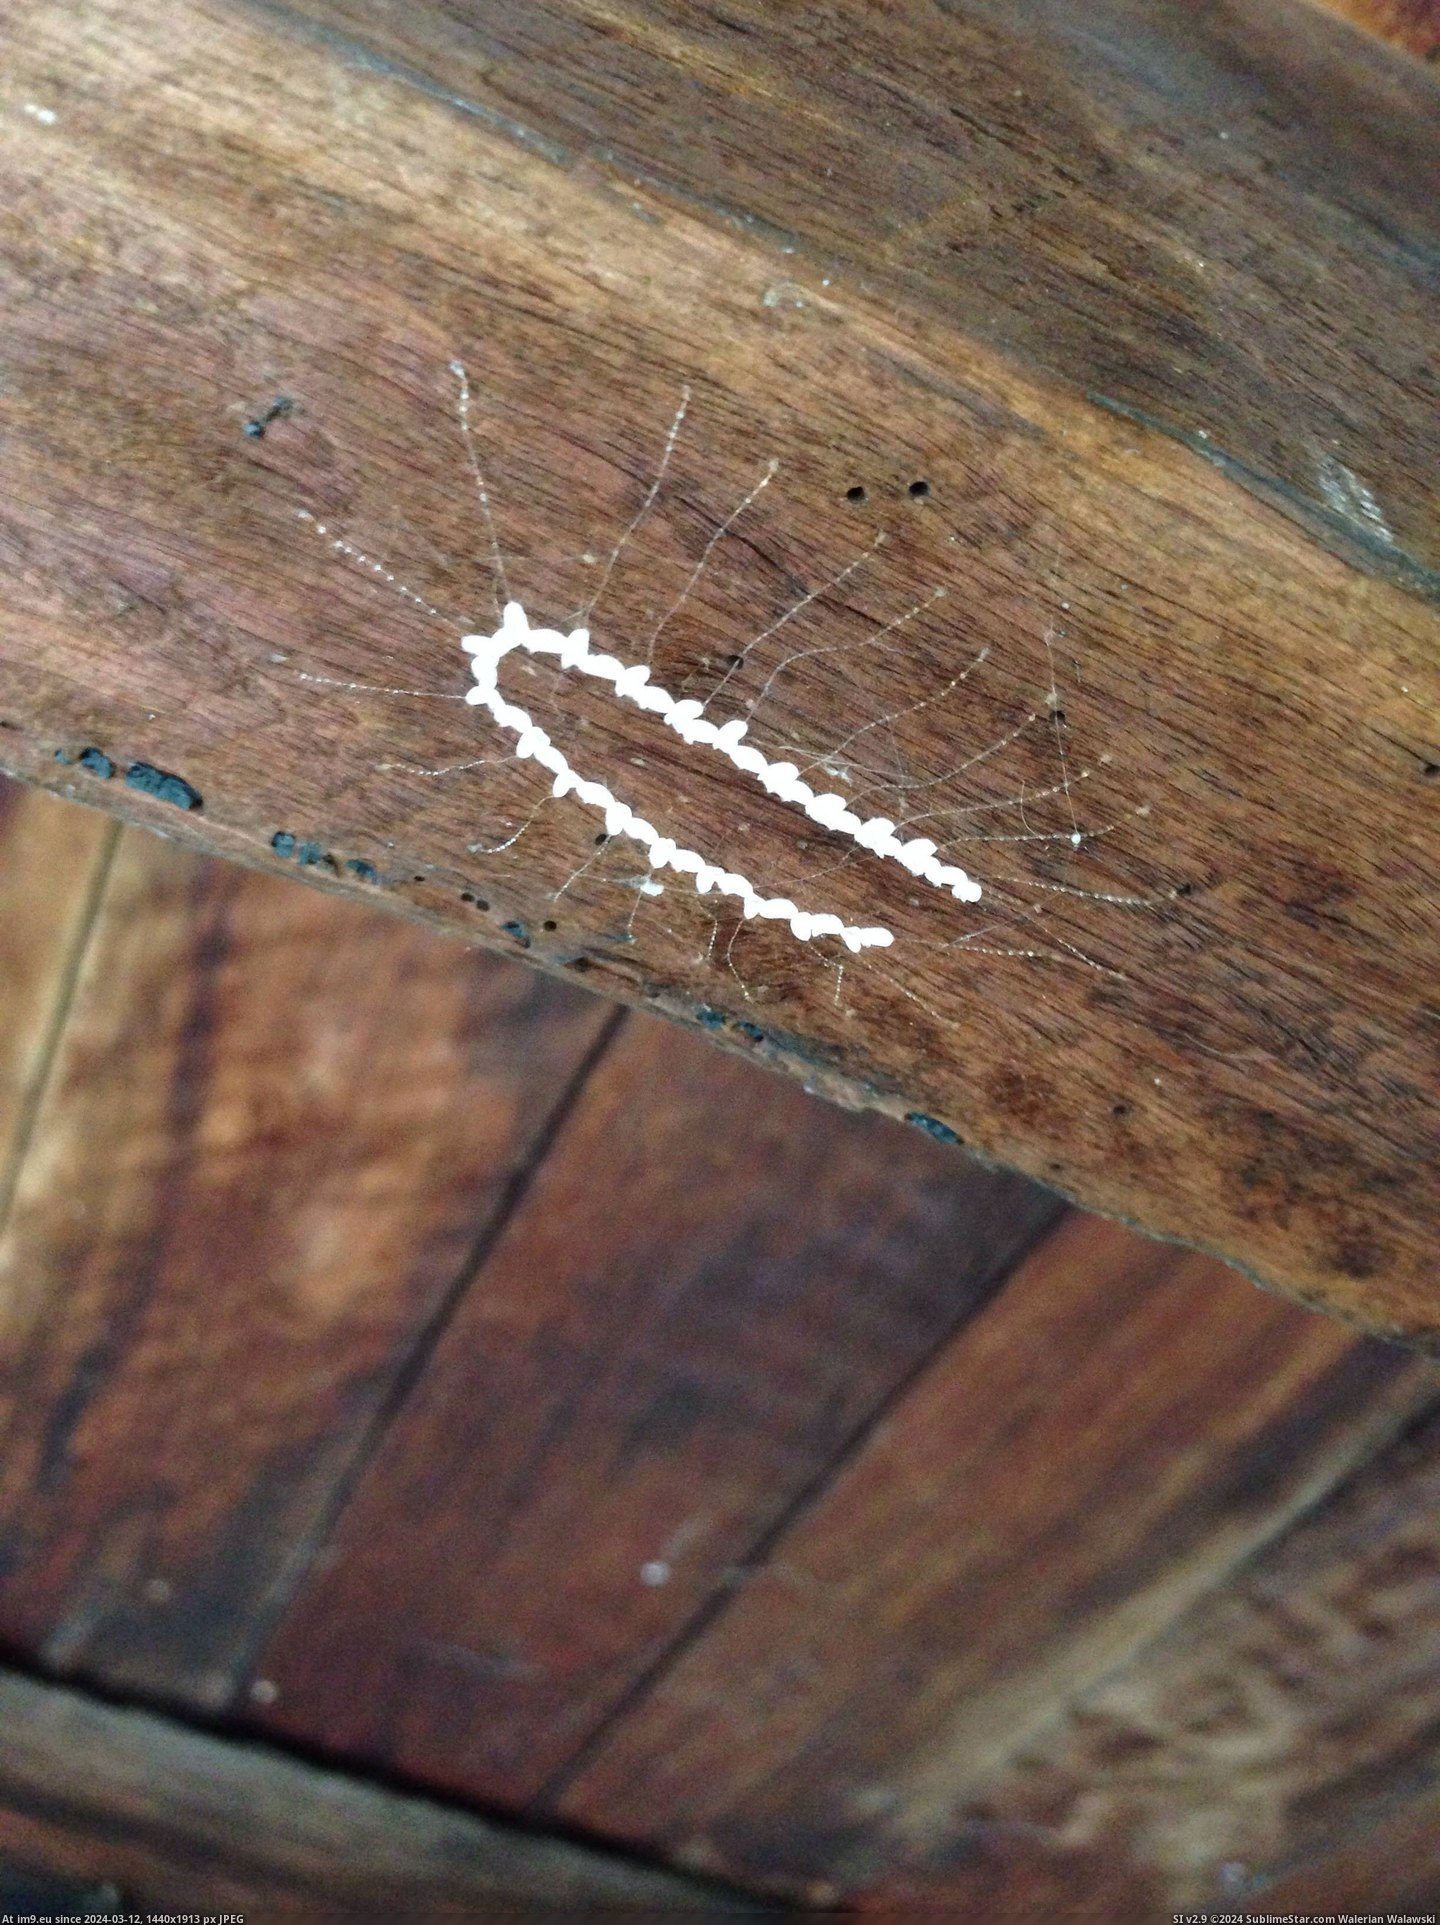 #Wtf #House #Thought #Uncles #Rafters #Australia #Hanging #Considered [Mildlyinteresting] Found this hanging from the rafters under my uncles house in Australia. Considered WTF- thought twice... Pic. (Obraz z album My r/MILDLYINTERESTING favs))